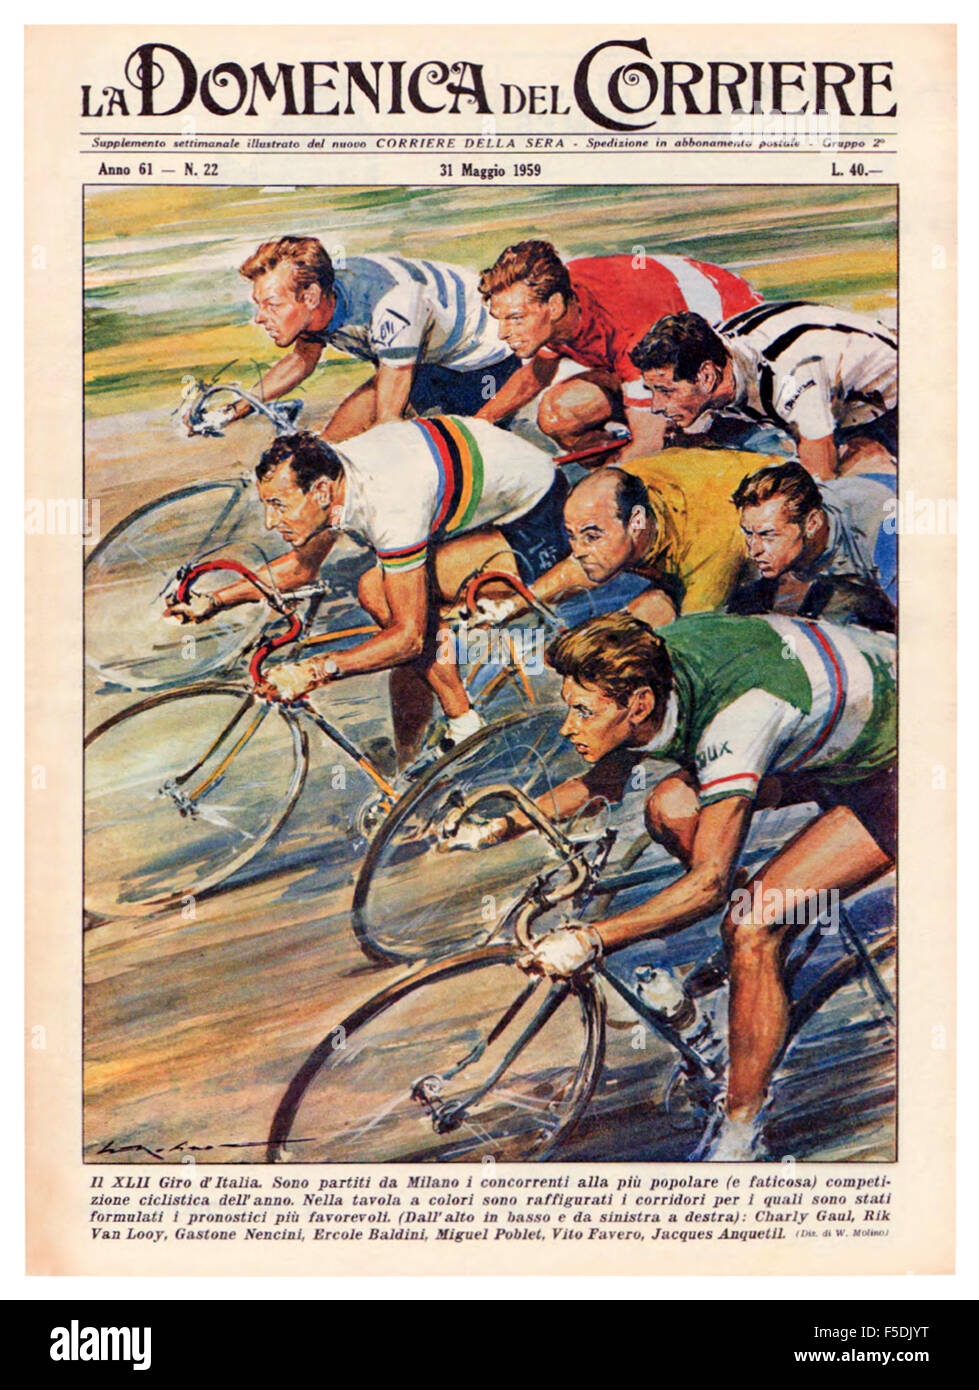 Front cover of 'La Domenica Del Corriere' 31 May 1959 featuring an illustration by Walter Molino (1915-1997) of riders competing in the forty second Giro d'Italia (Tour of Italy) cycle race. The image shows leading competitors as they departed from Milan; from top to bottom and left to right: Charly Gaul (eventual winner); Rik Van Loony; Gastone Nencini; Ercole Baldini; Miguel Poblet; Vito Favero and Jacques Anquetil. Stock Photo